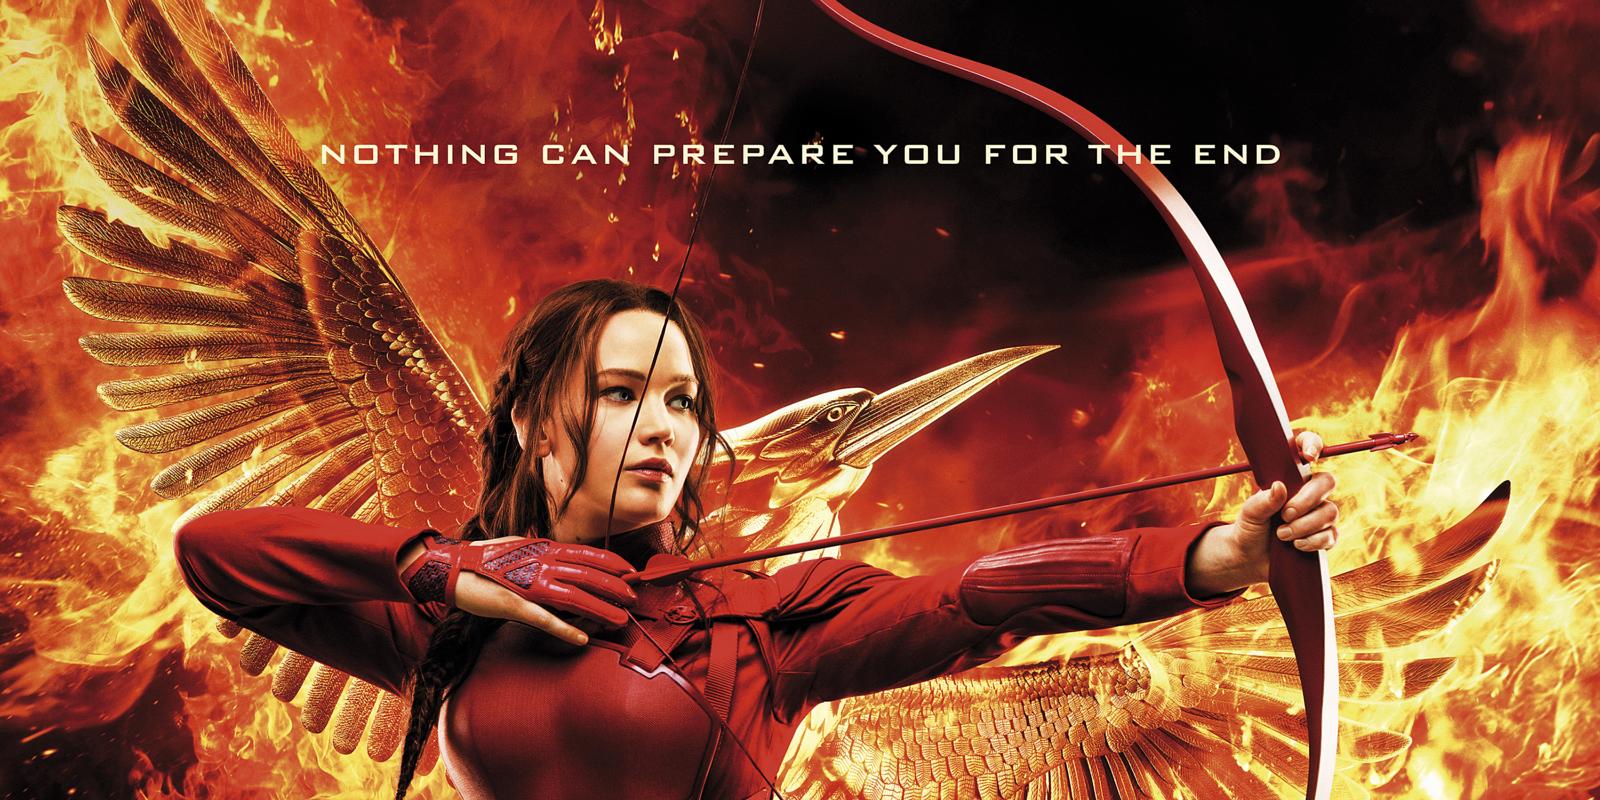 The Hunger Games #4